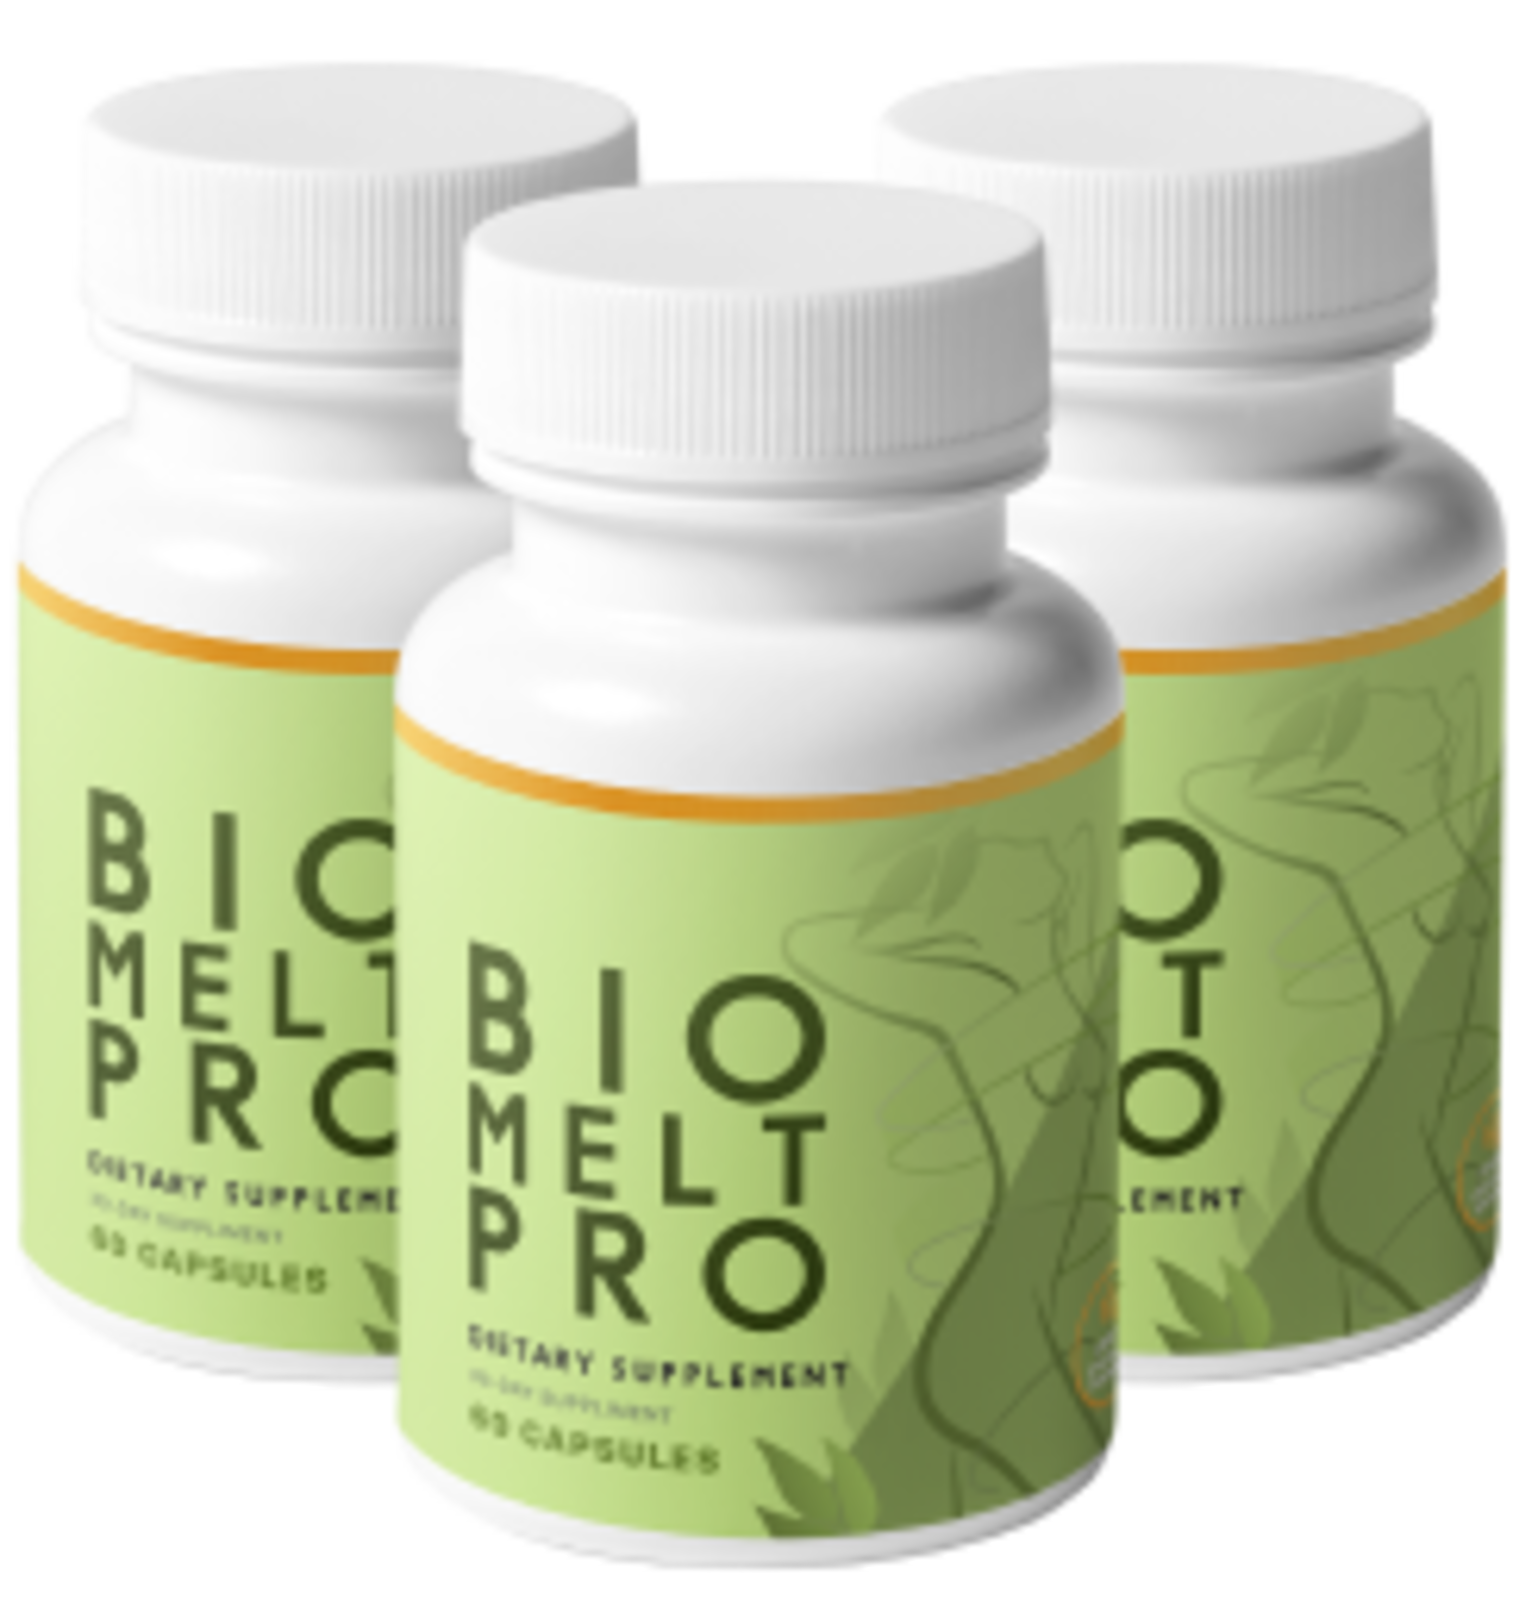 Bio Melt Pro Reviews: Any Side Effects? By MJ Customer Reviews